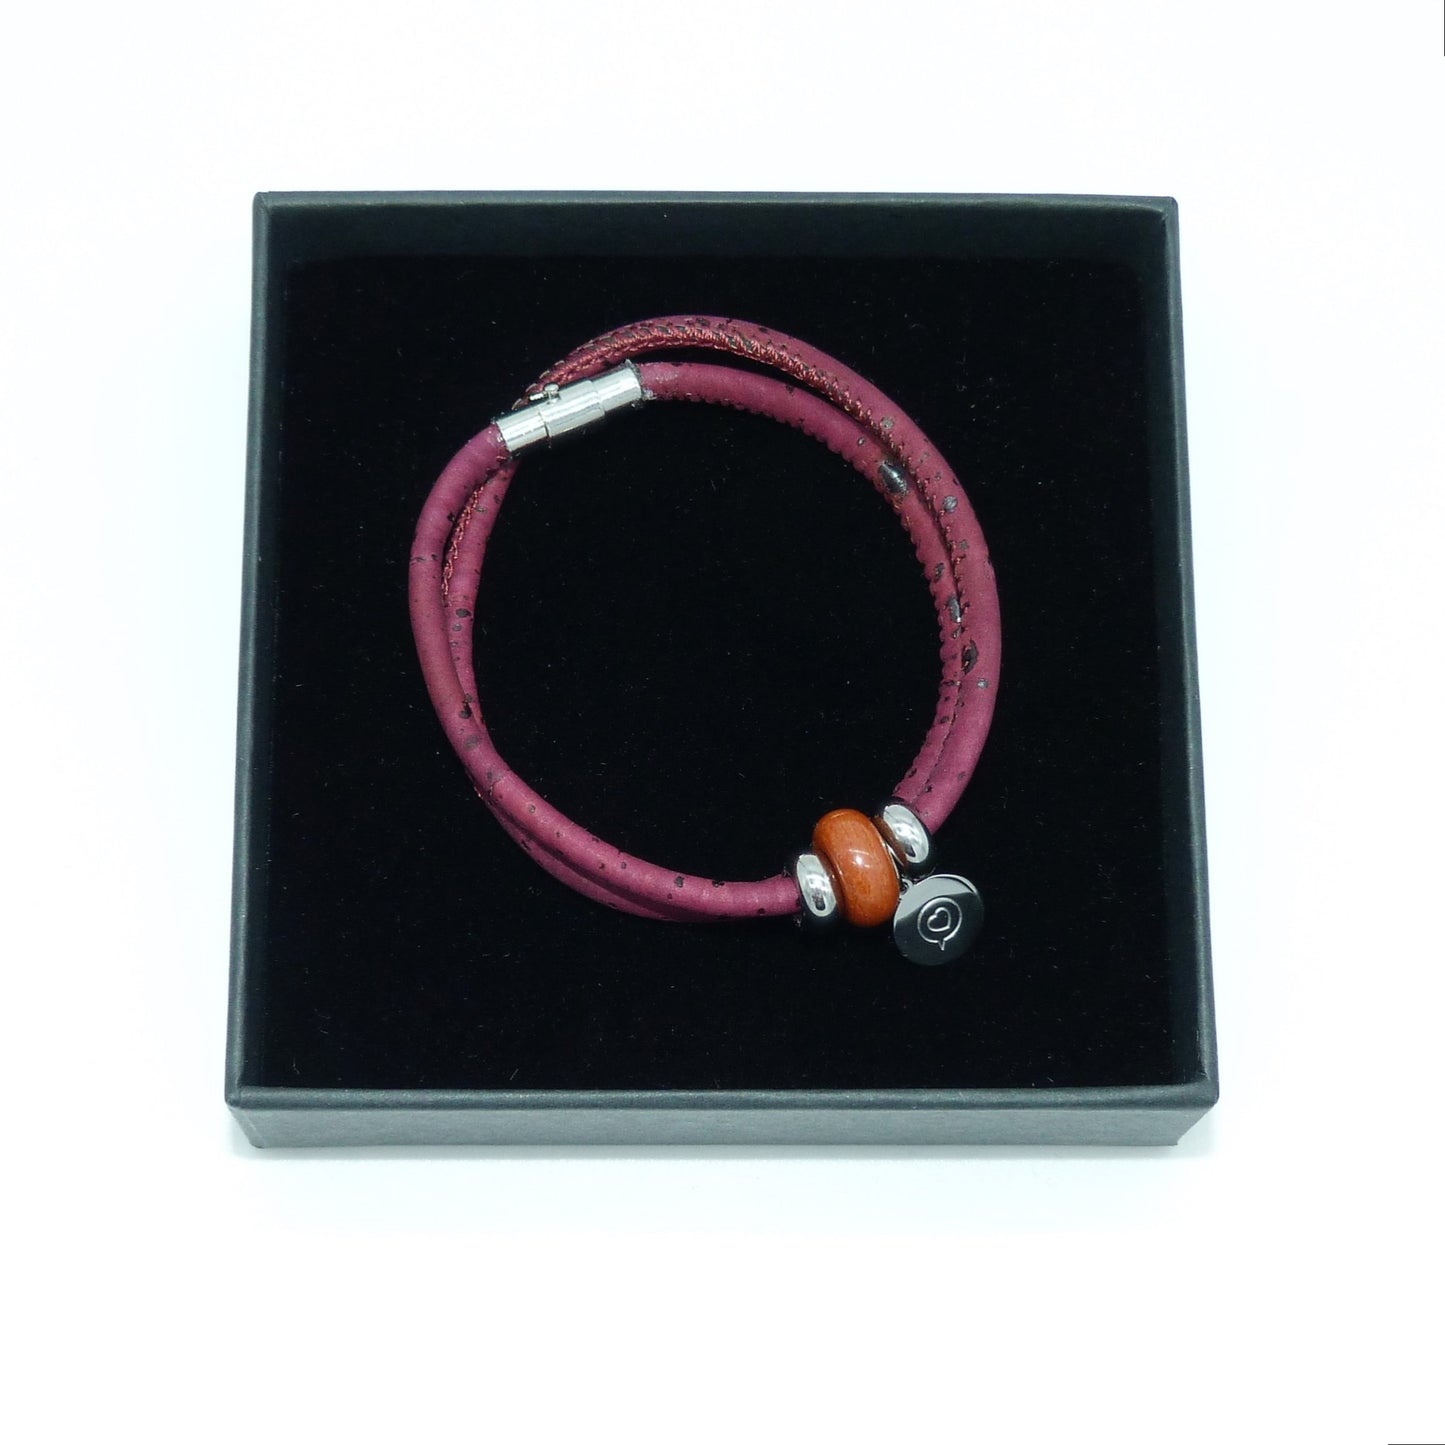 The Talk Kind Bracelet from Roo Betty mixing Gemstone and Colour Therapy - boost your sense of self and ground with this Red Jasper Bracelet